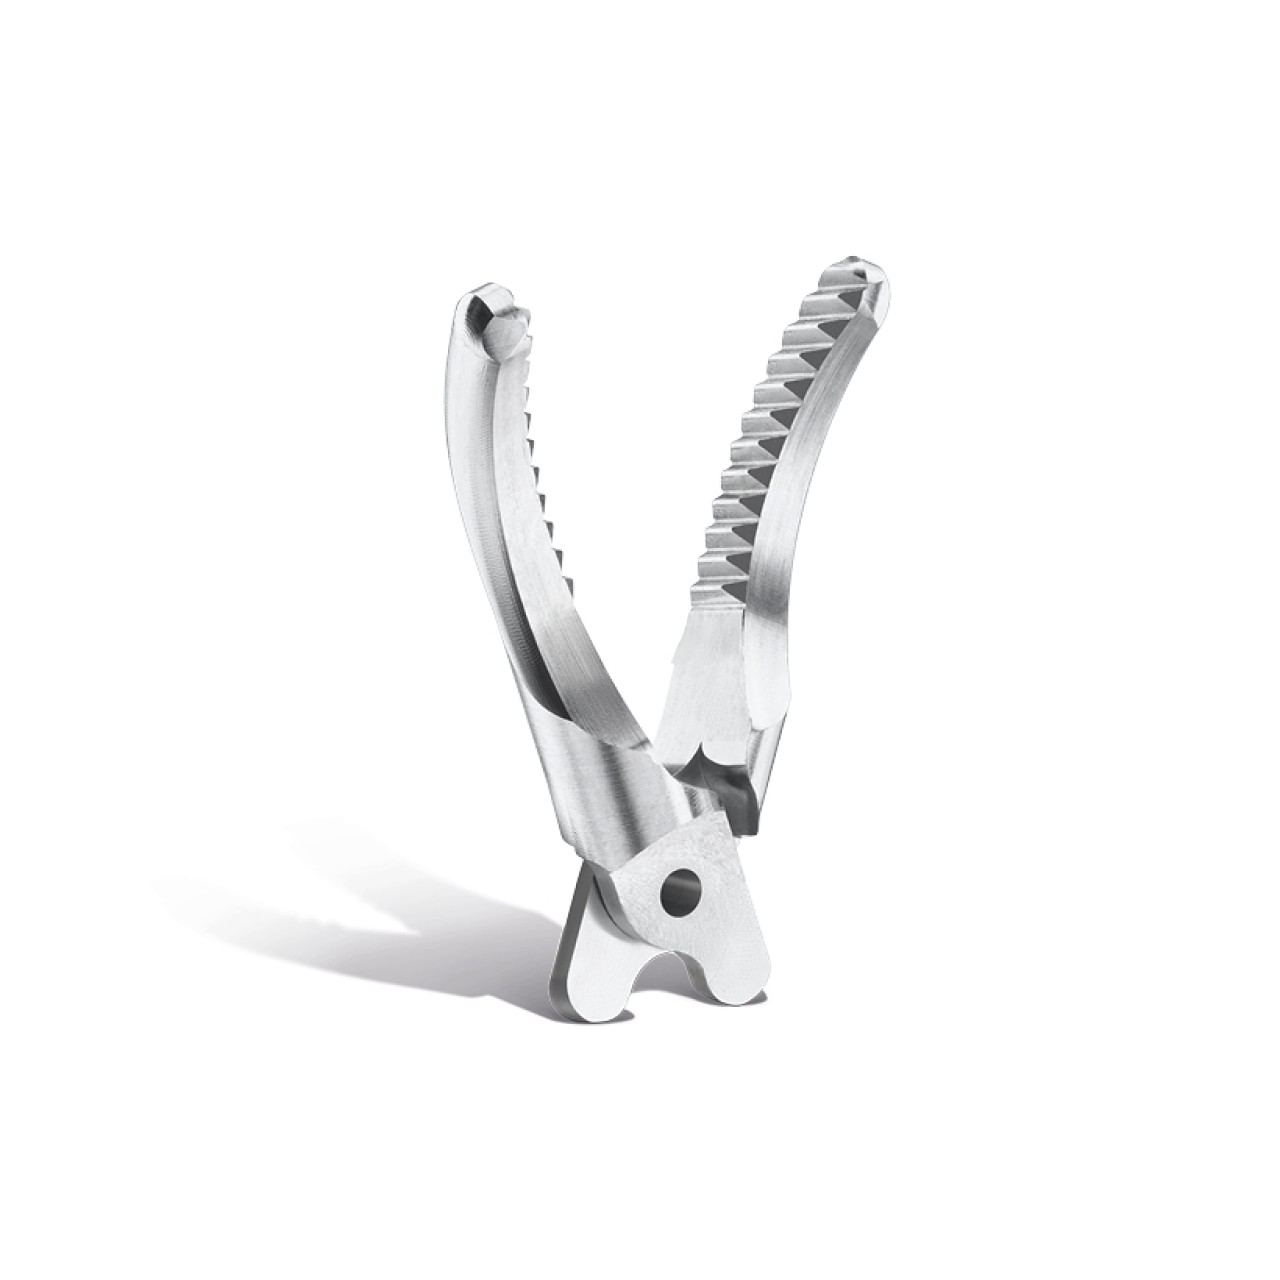  Instrument jaw (stainless steel)  